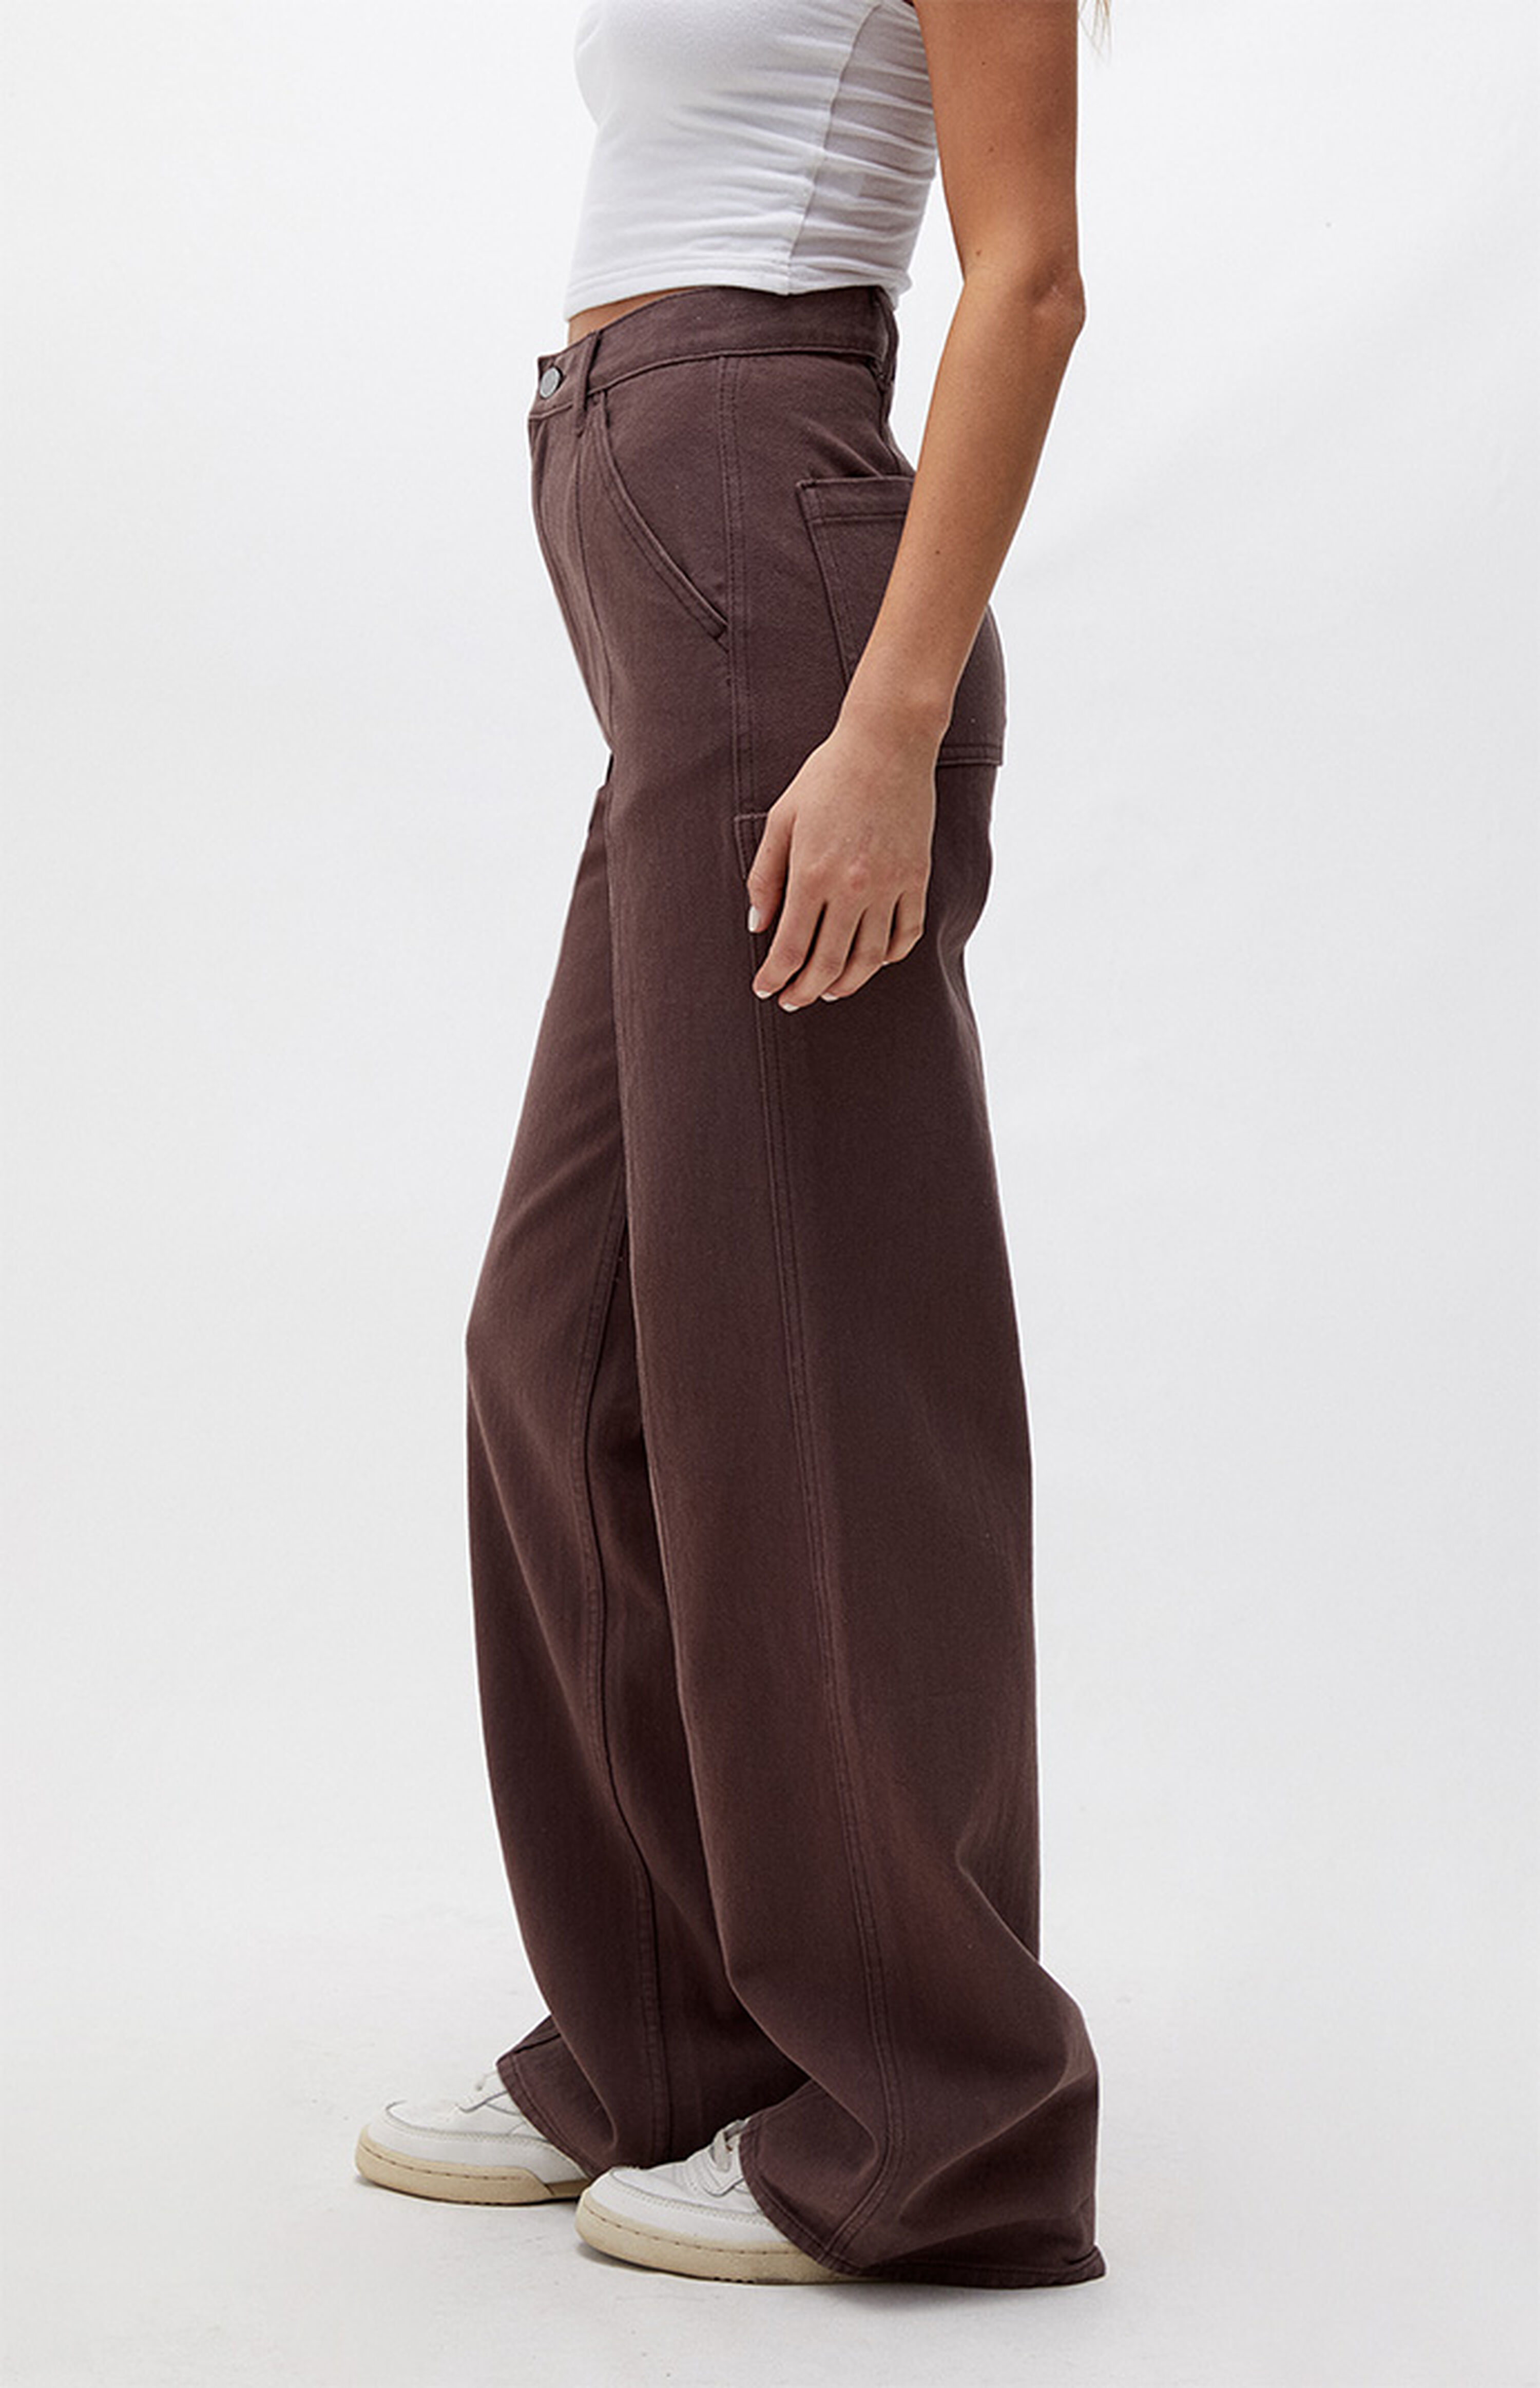 PacSun Brown Ultra High Waisted Fitted Flare Pants | PacSun